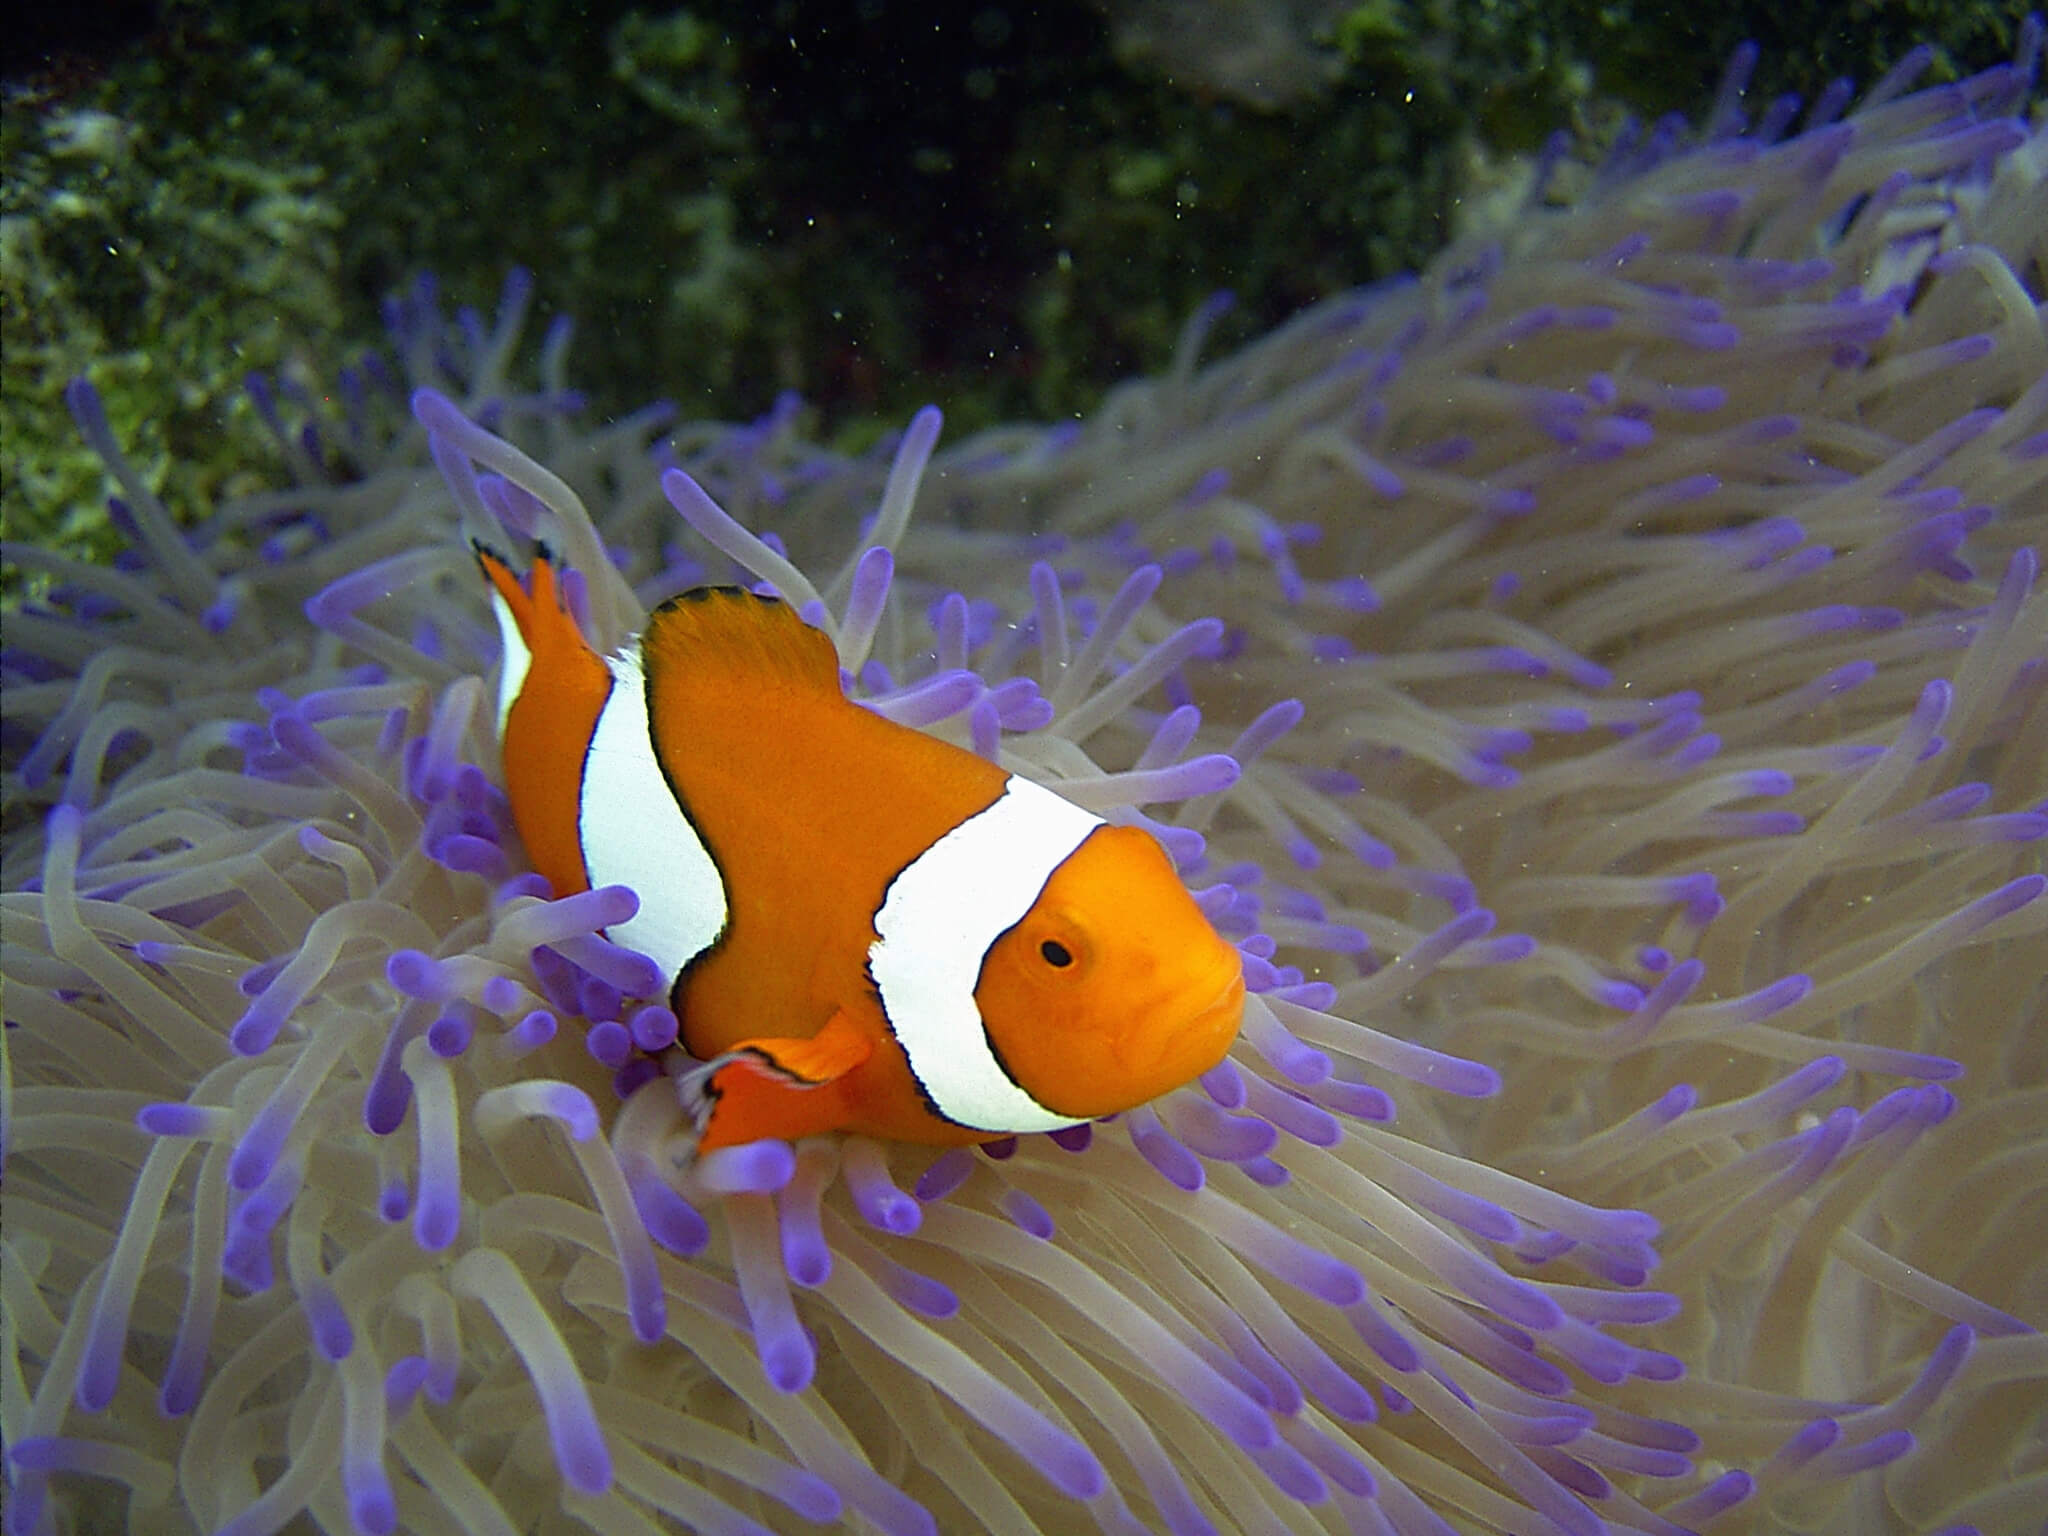 Image of a clownfish peaking out of an anemone